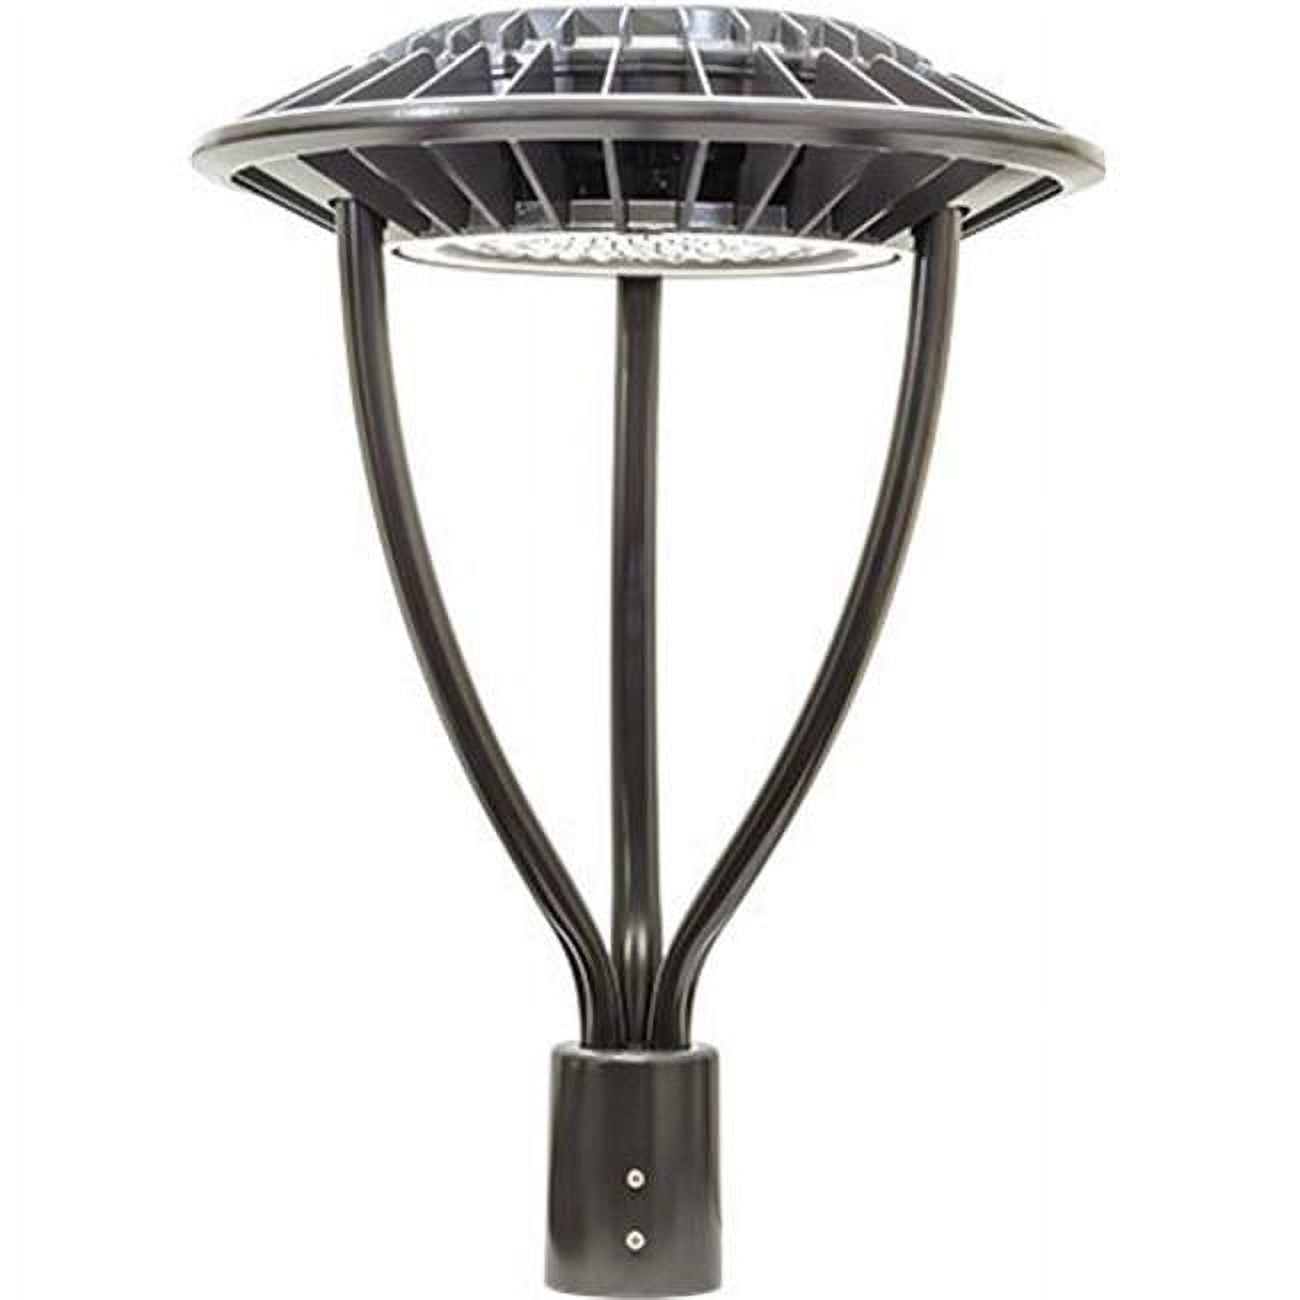 Picture of Dabmar Lighting GM575-LED80-BZ 80 watt 120-277 V LED Board Post Top Fixture with UL Listed Wire & Cable, Black, Bronze & Verde Green